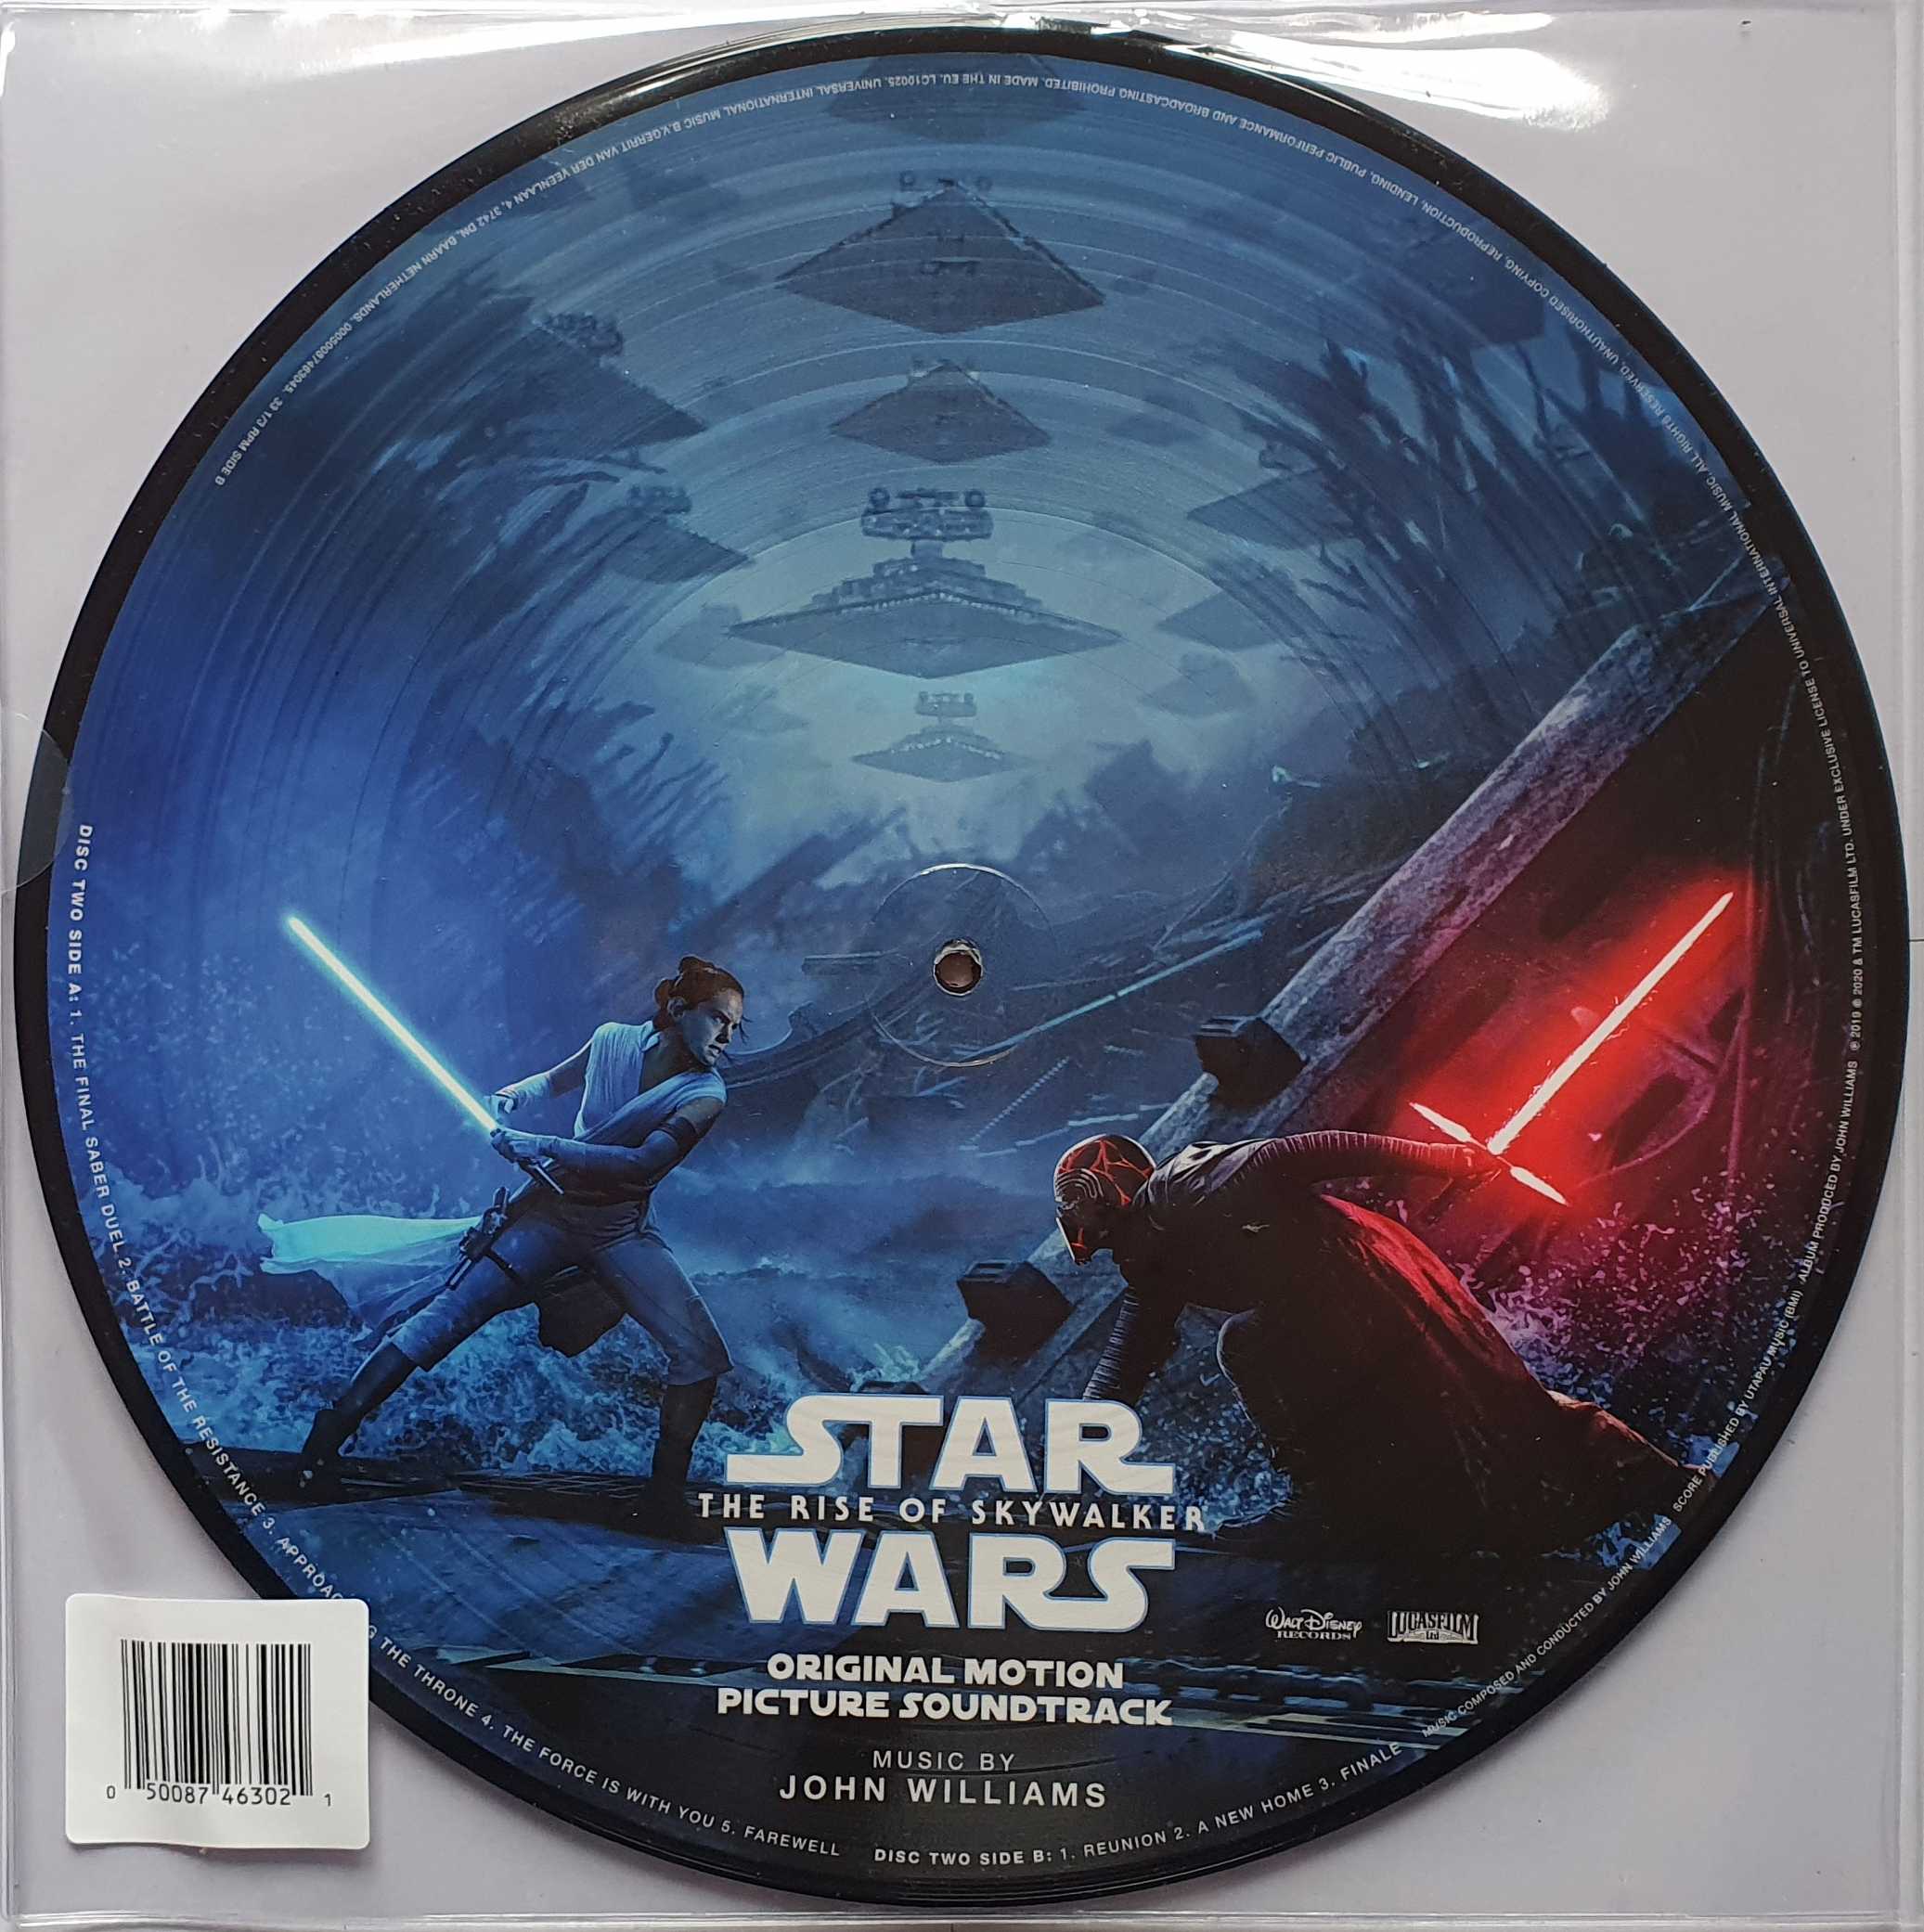 Picture of 00050087463045 Star Wars: The Rise Of Skywalker by artist John Williams from ITV, Channel 4 and Channel 5 library